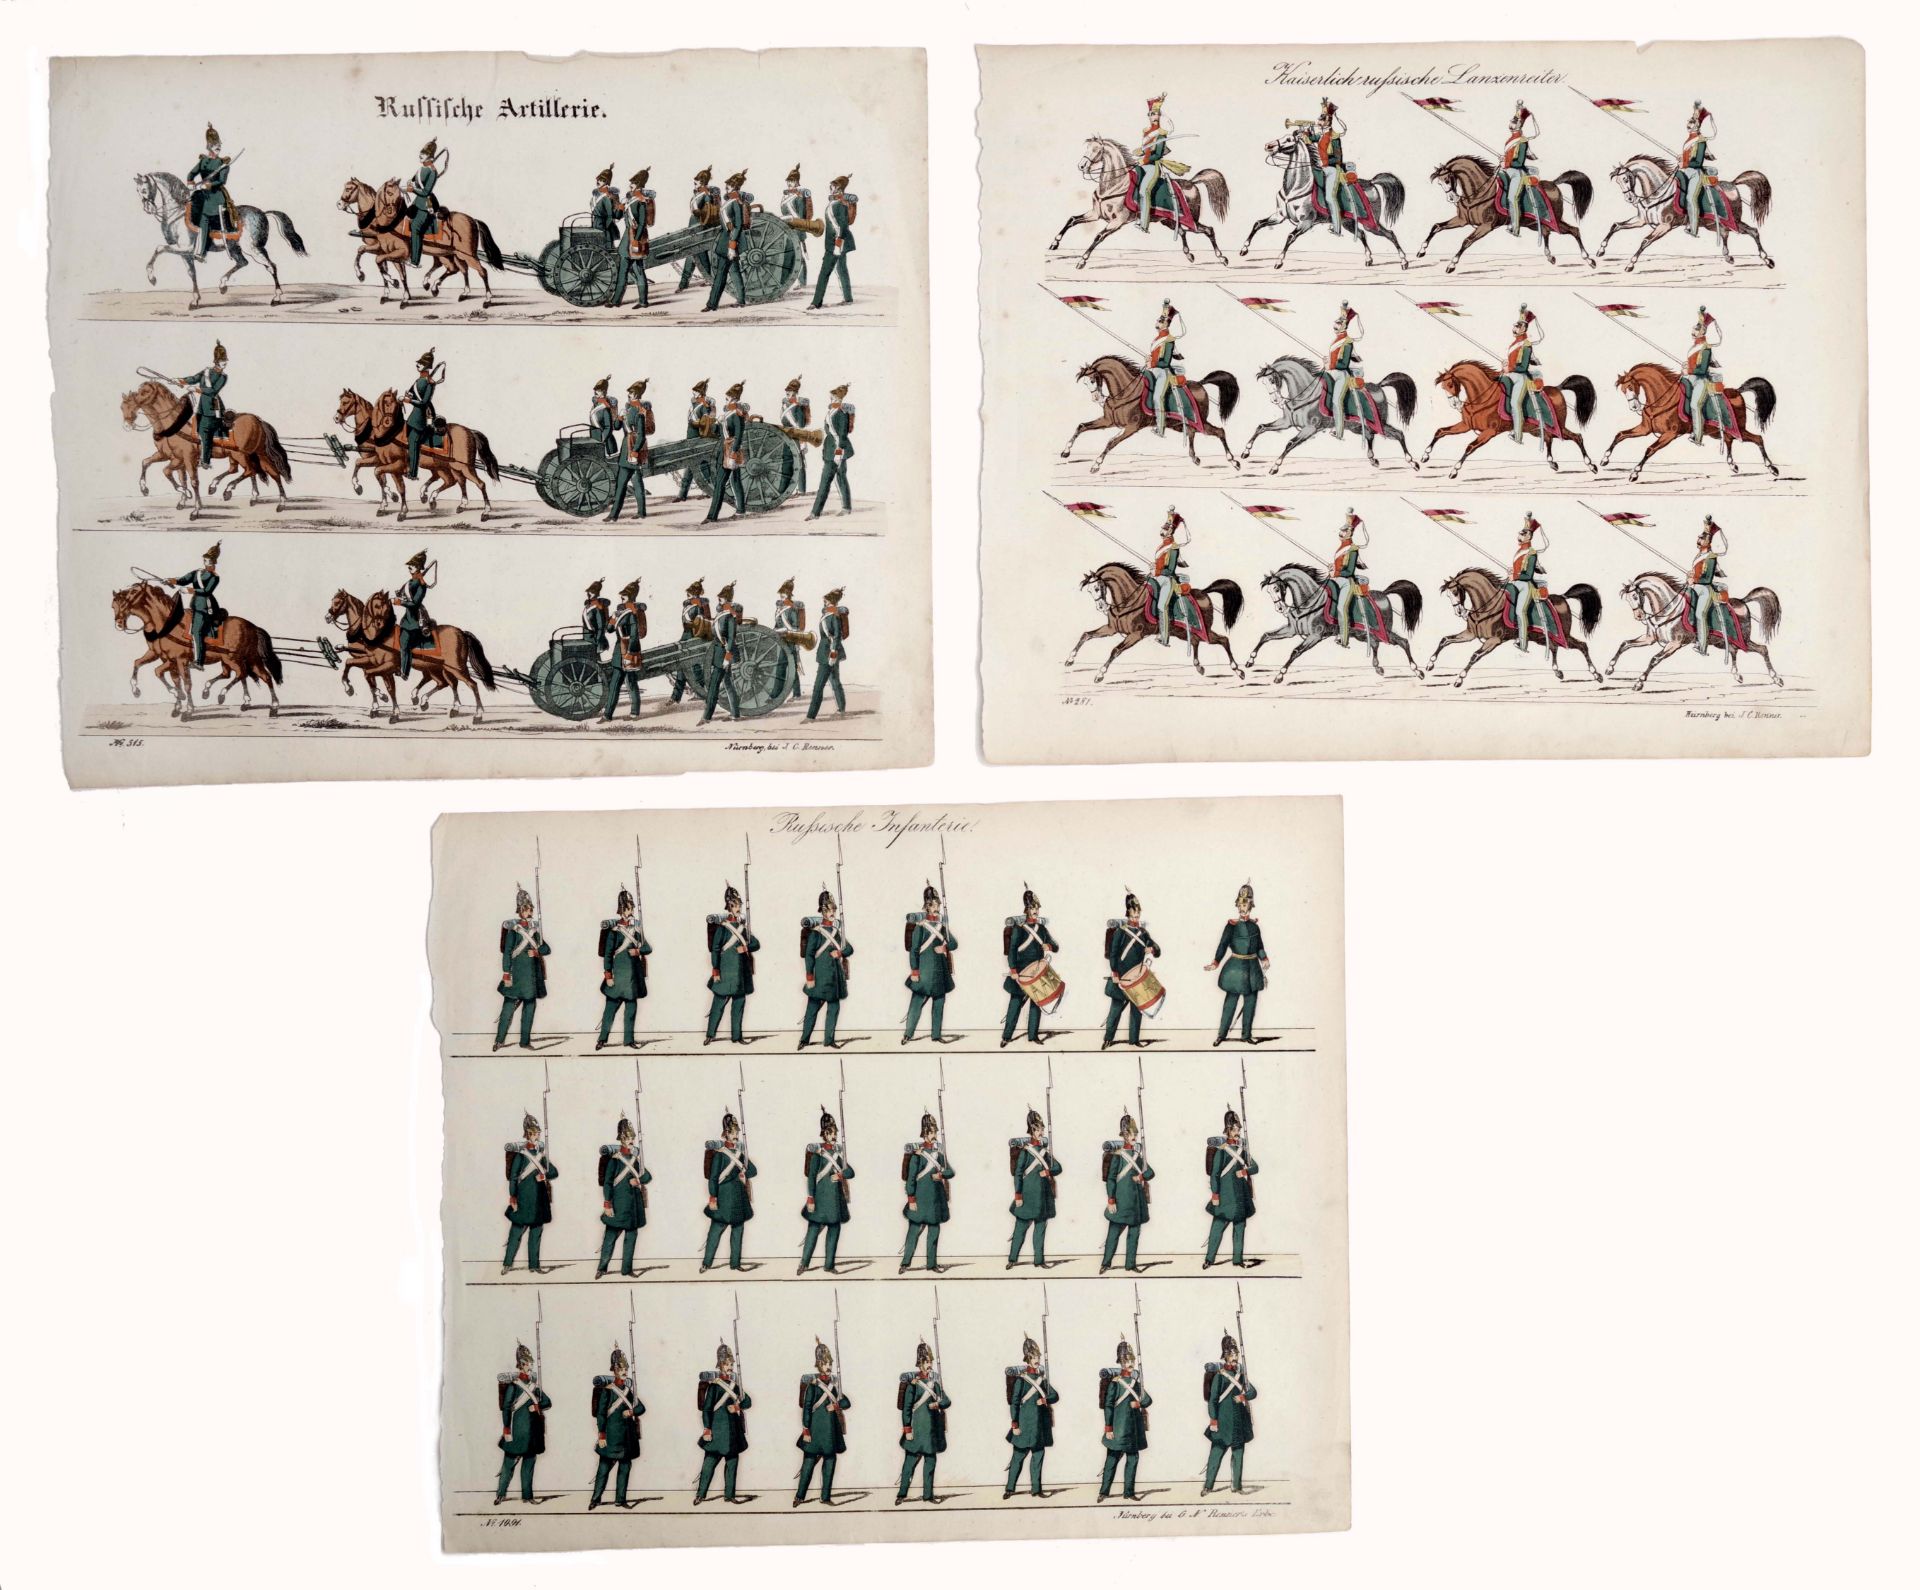 Imperial Russian Lancers (Uhlans) | Infantry and Artillery by J.C. Renner